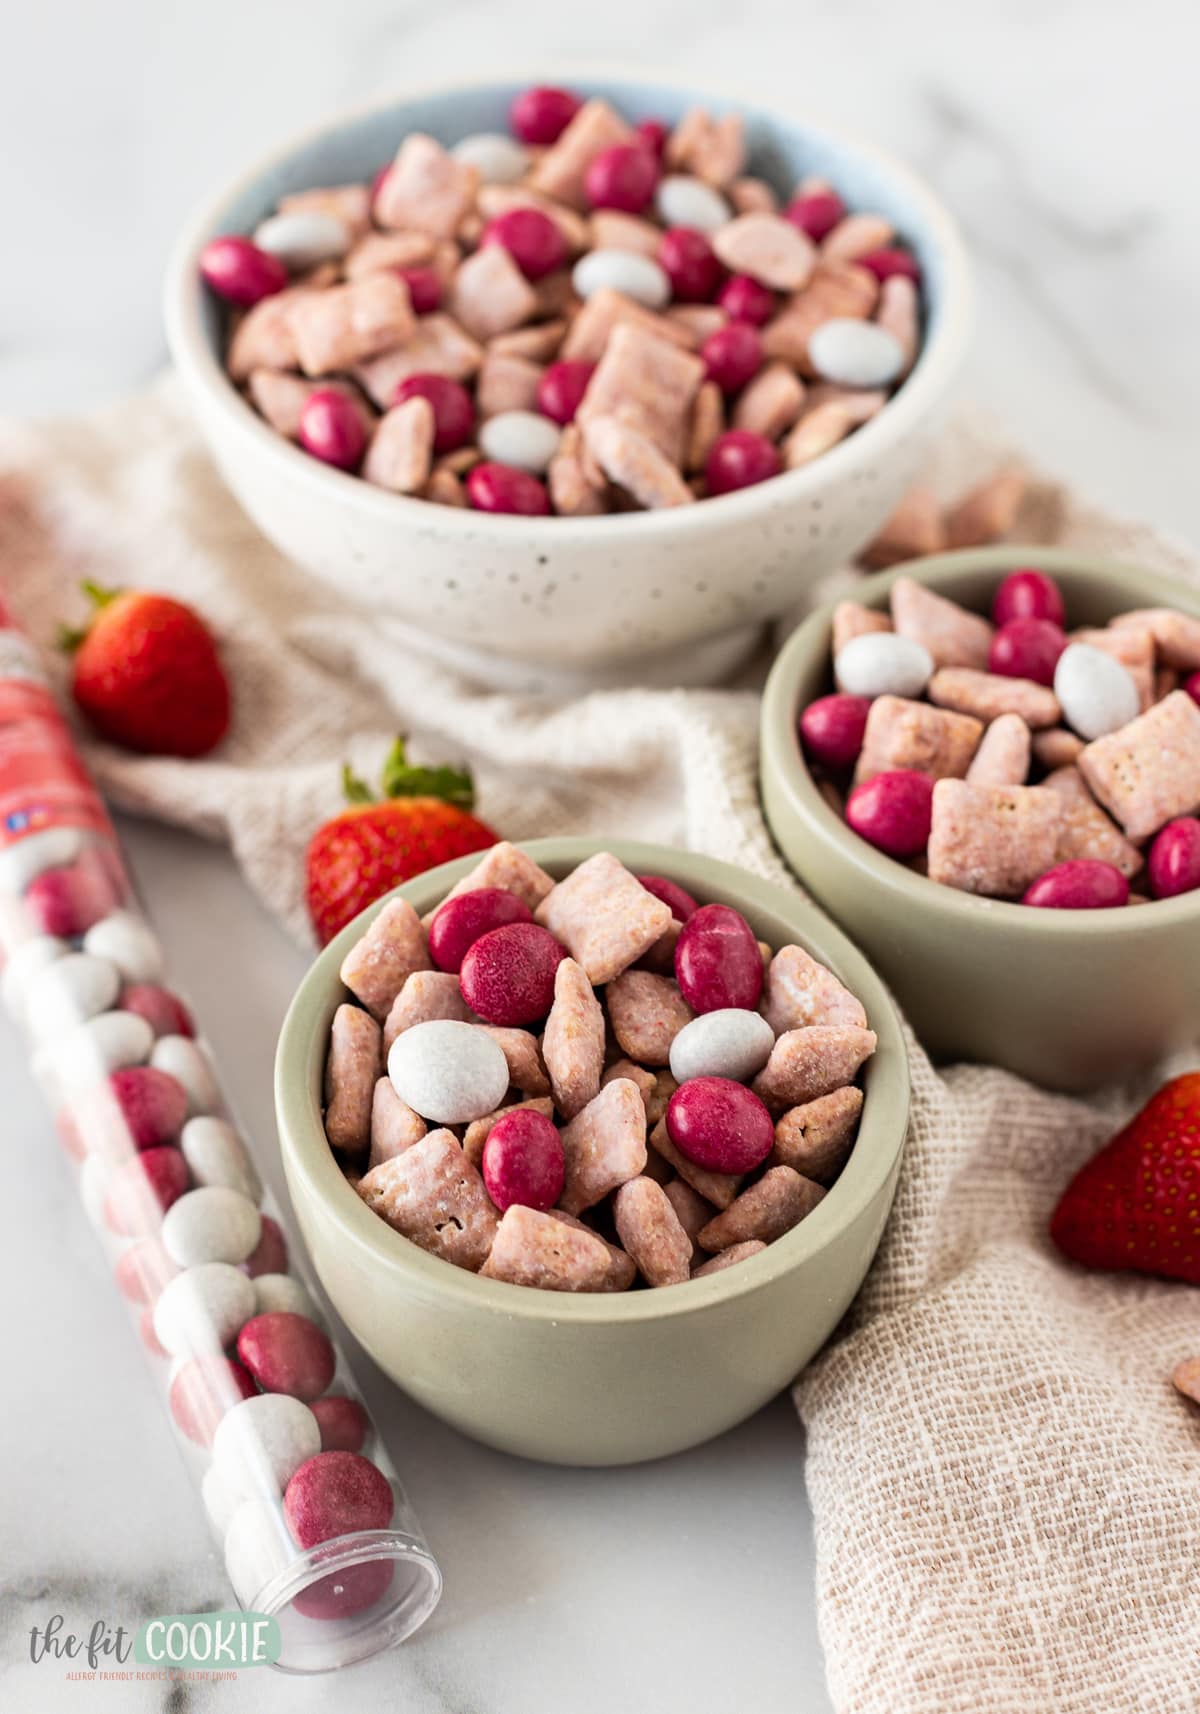 allergy friendly valentine's day snack mix made with strawberry muddy buddies and no whey chocolate candies.  